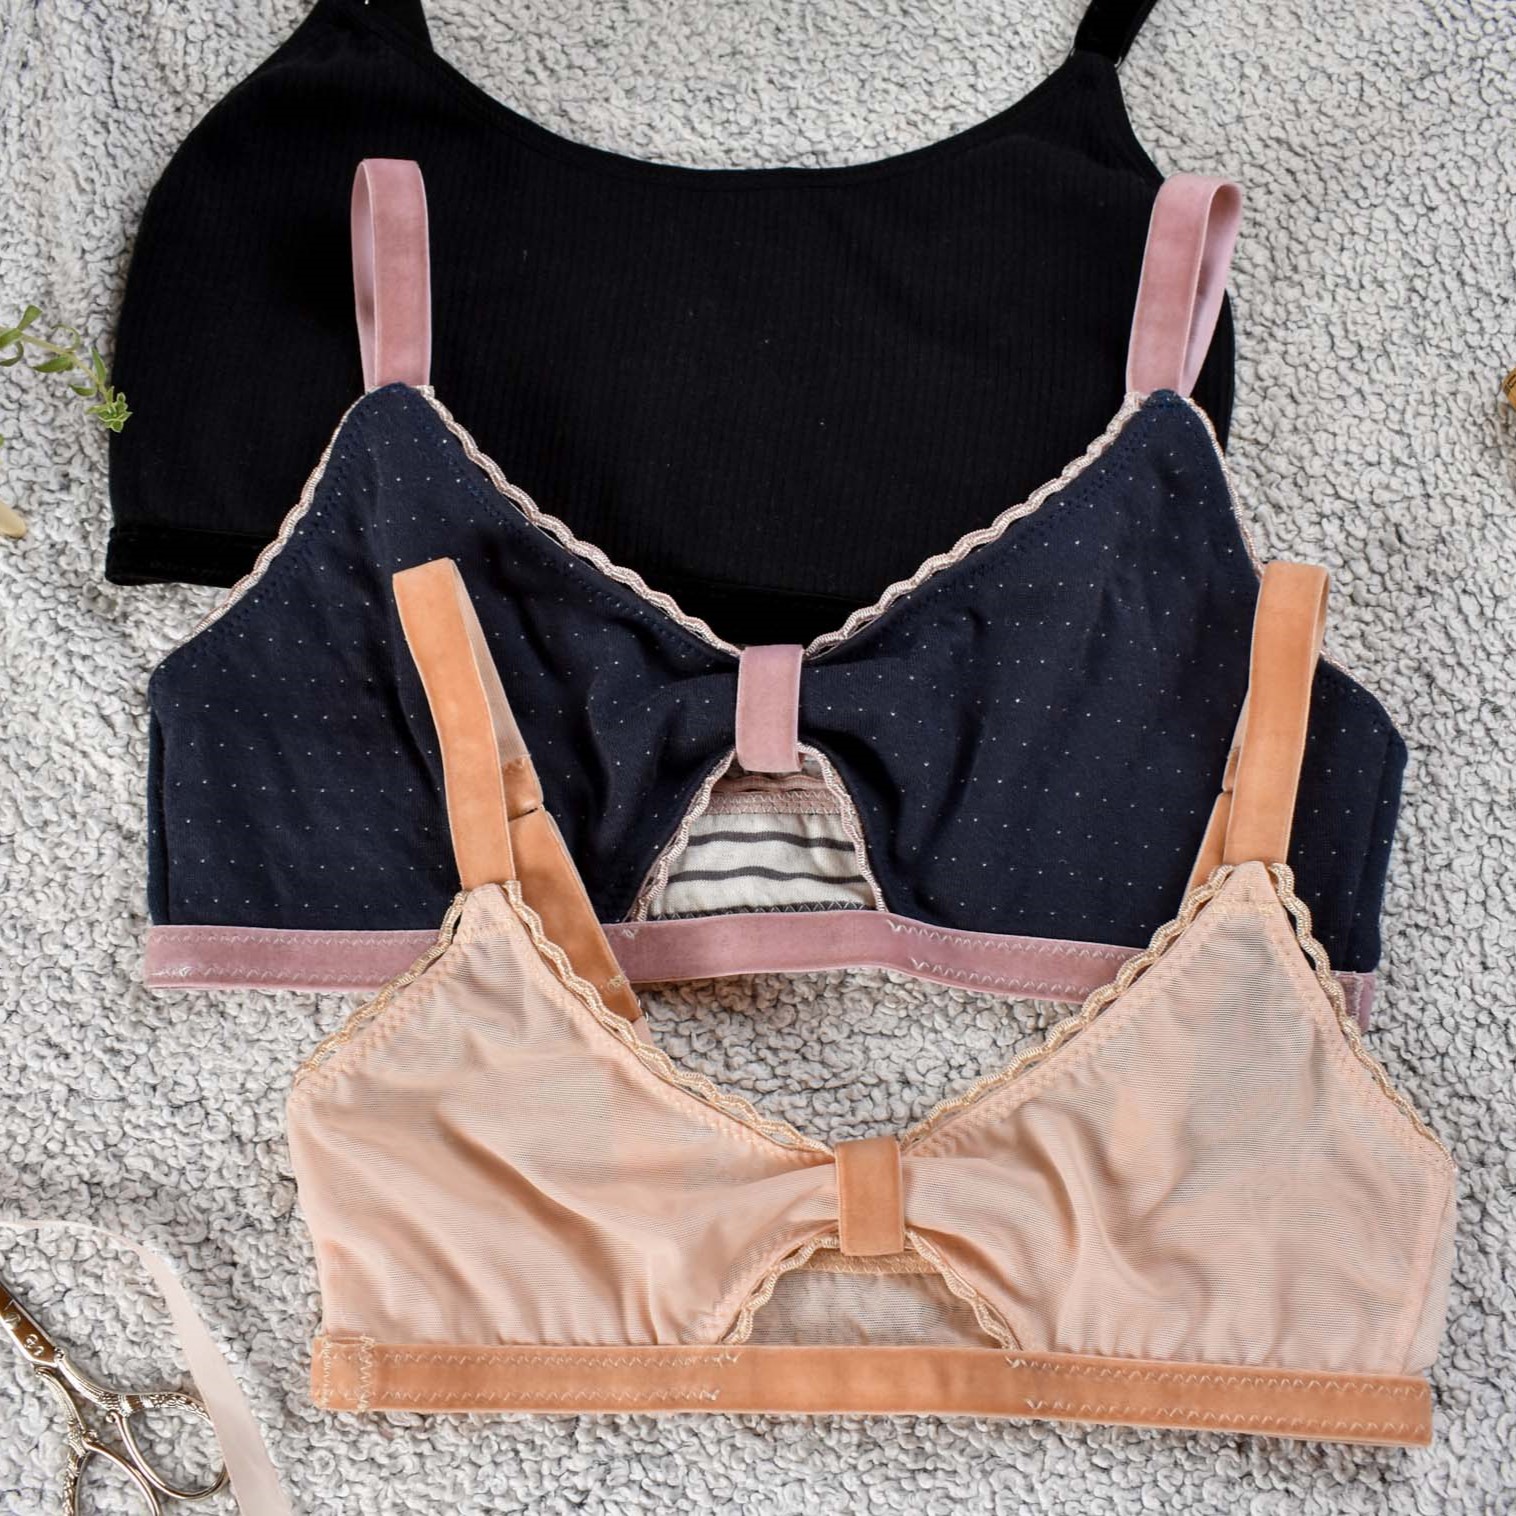 Bralette Sewing Pattern // PDF Digital Pattern. This is a Soft Bra, Crop  Top, Bandeau Style. Barbary Bralette by Sew Projects. -  Canada